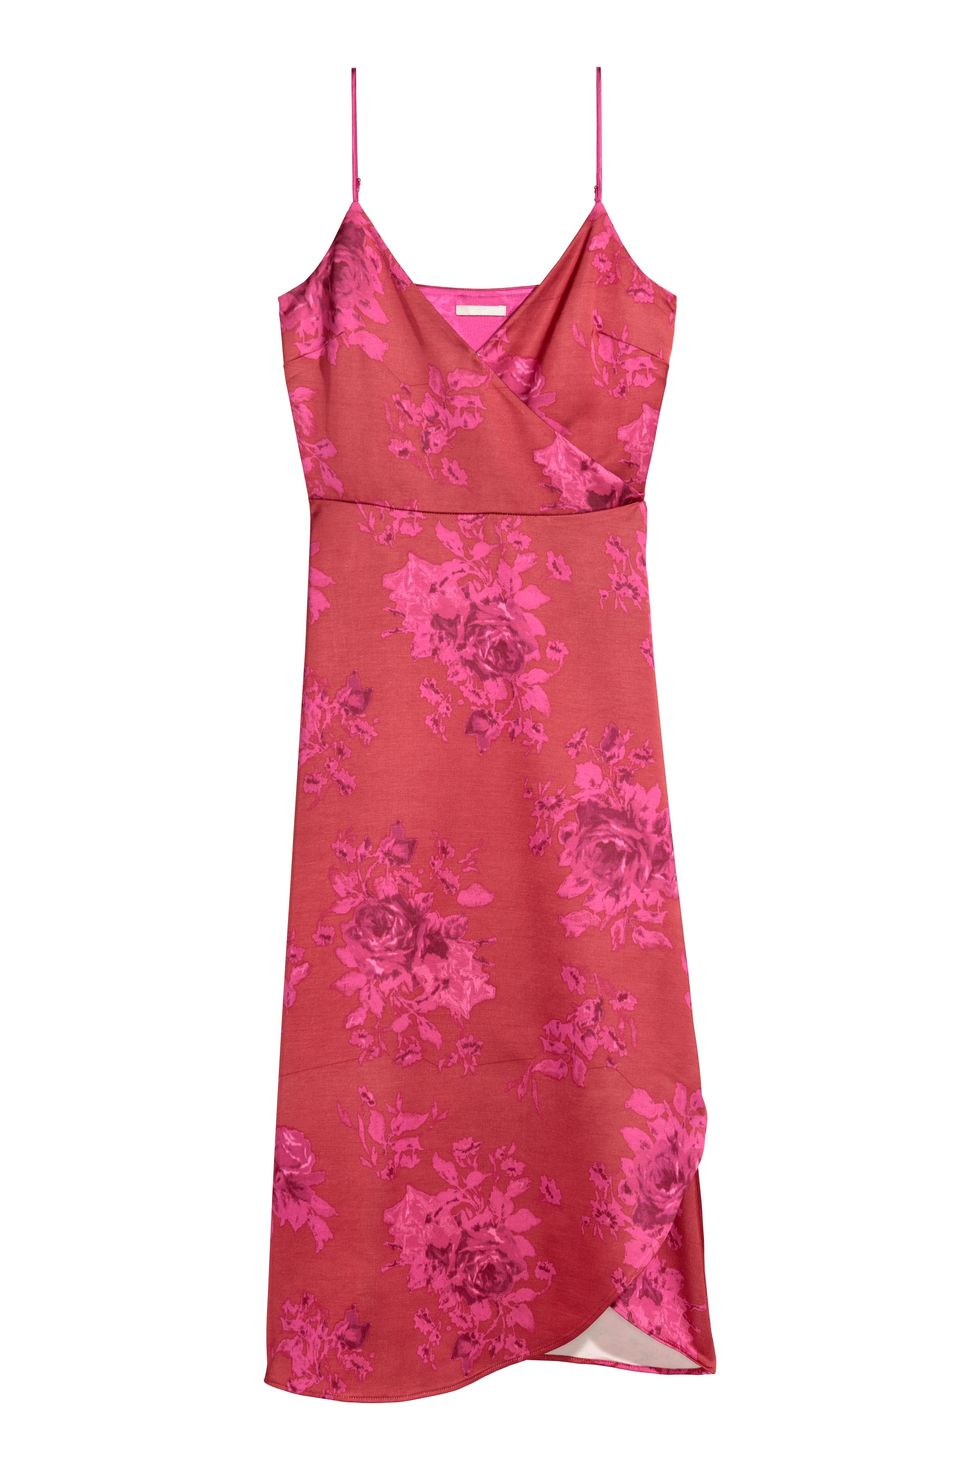 Clothing, Pink, Day dress, Dress, Magenta, camisoles, Nightgown, Nightwear, Cocktail dress, Textile, 